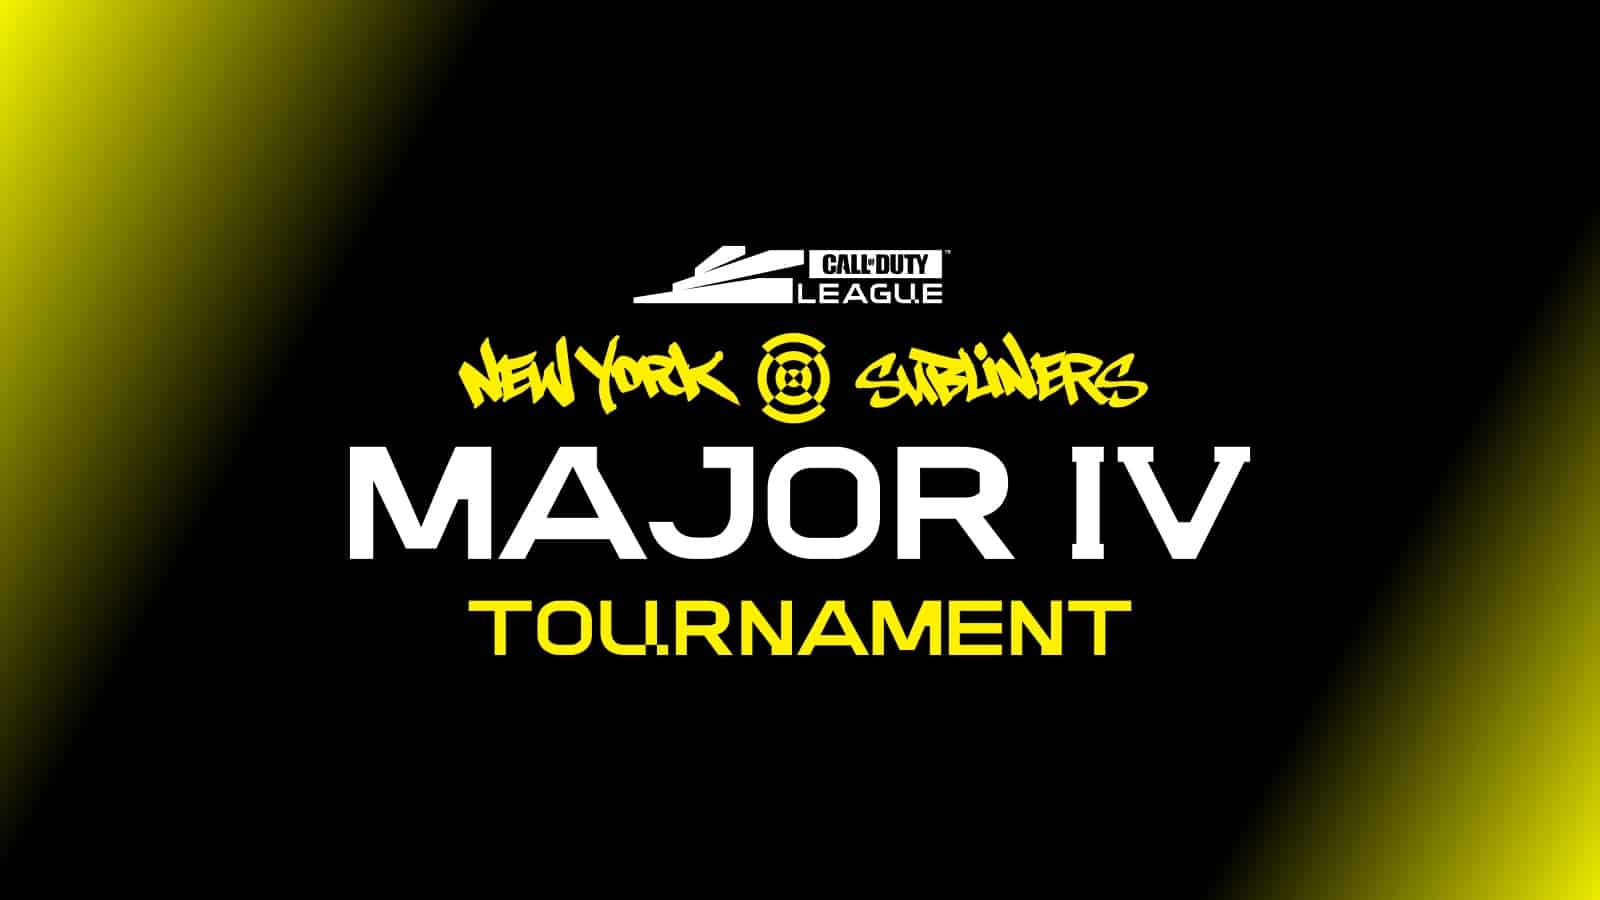 New York Subliners Major IV CDL tournament